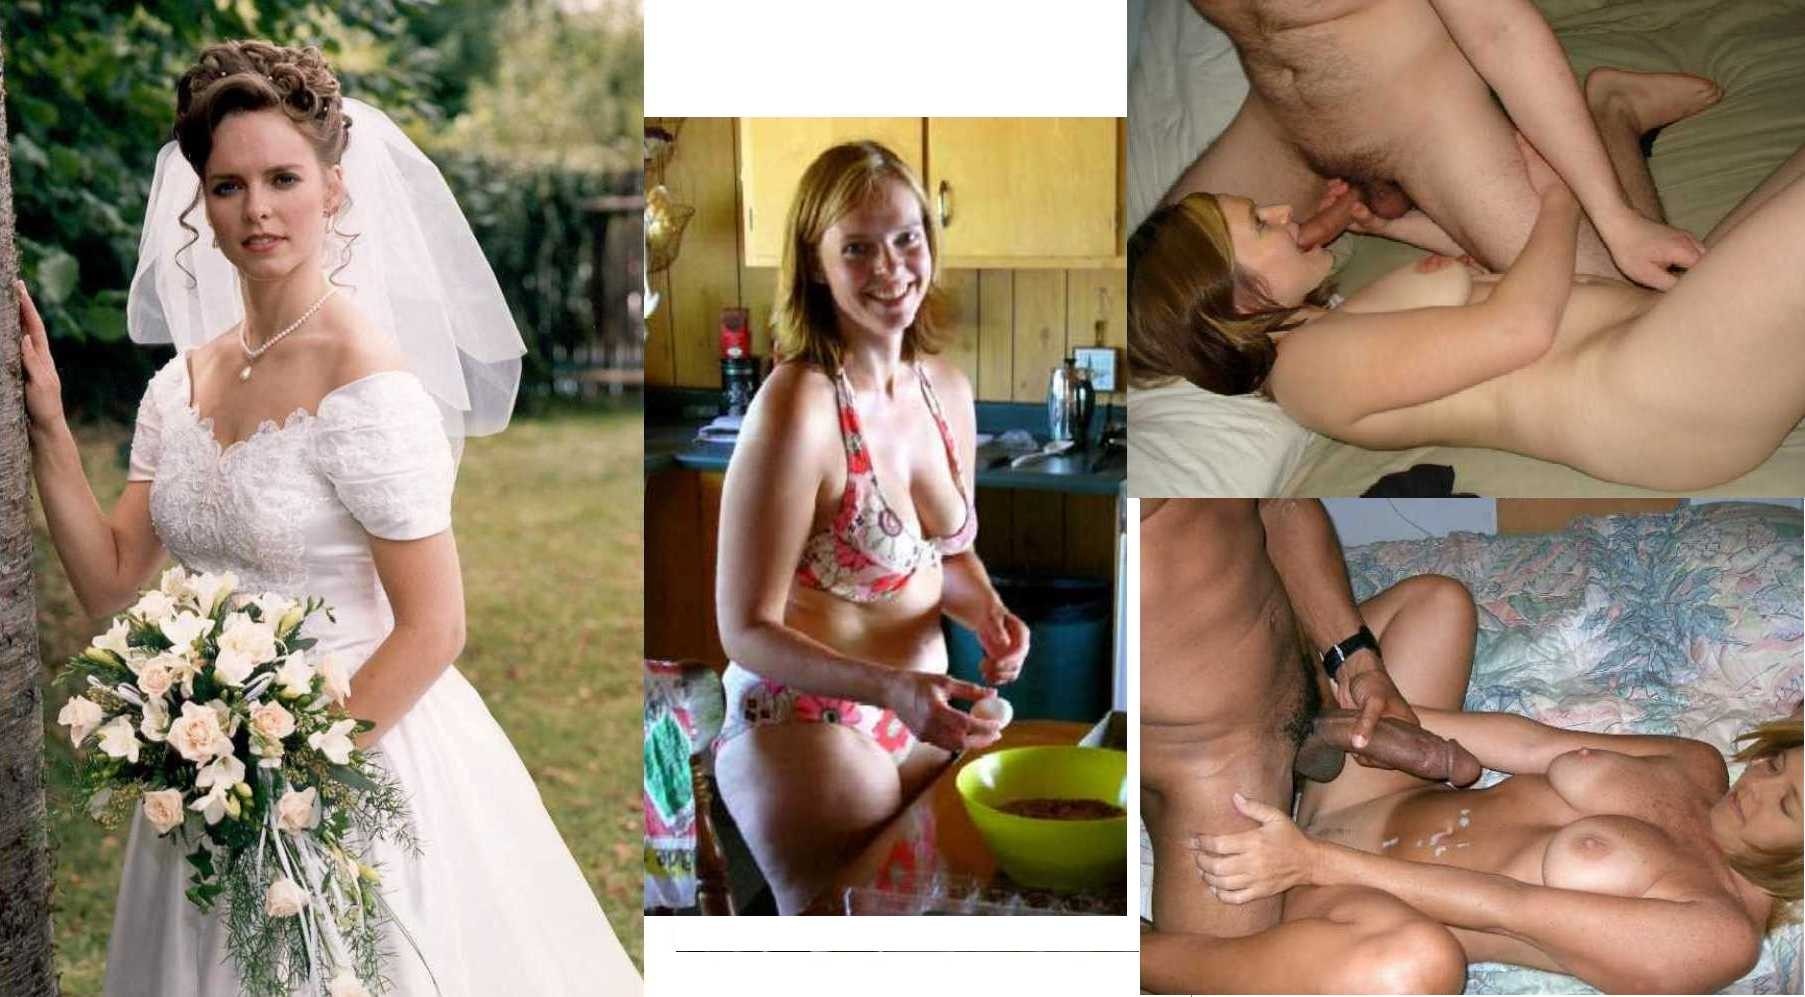 Russian Sex After Marriage (60 photos) image